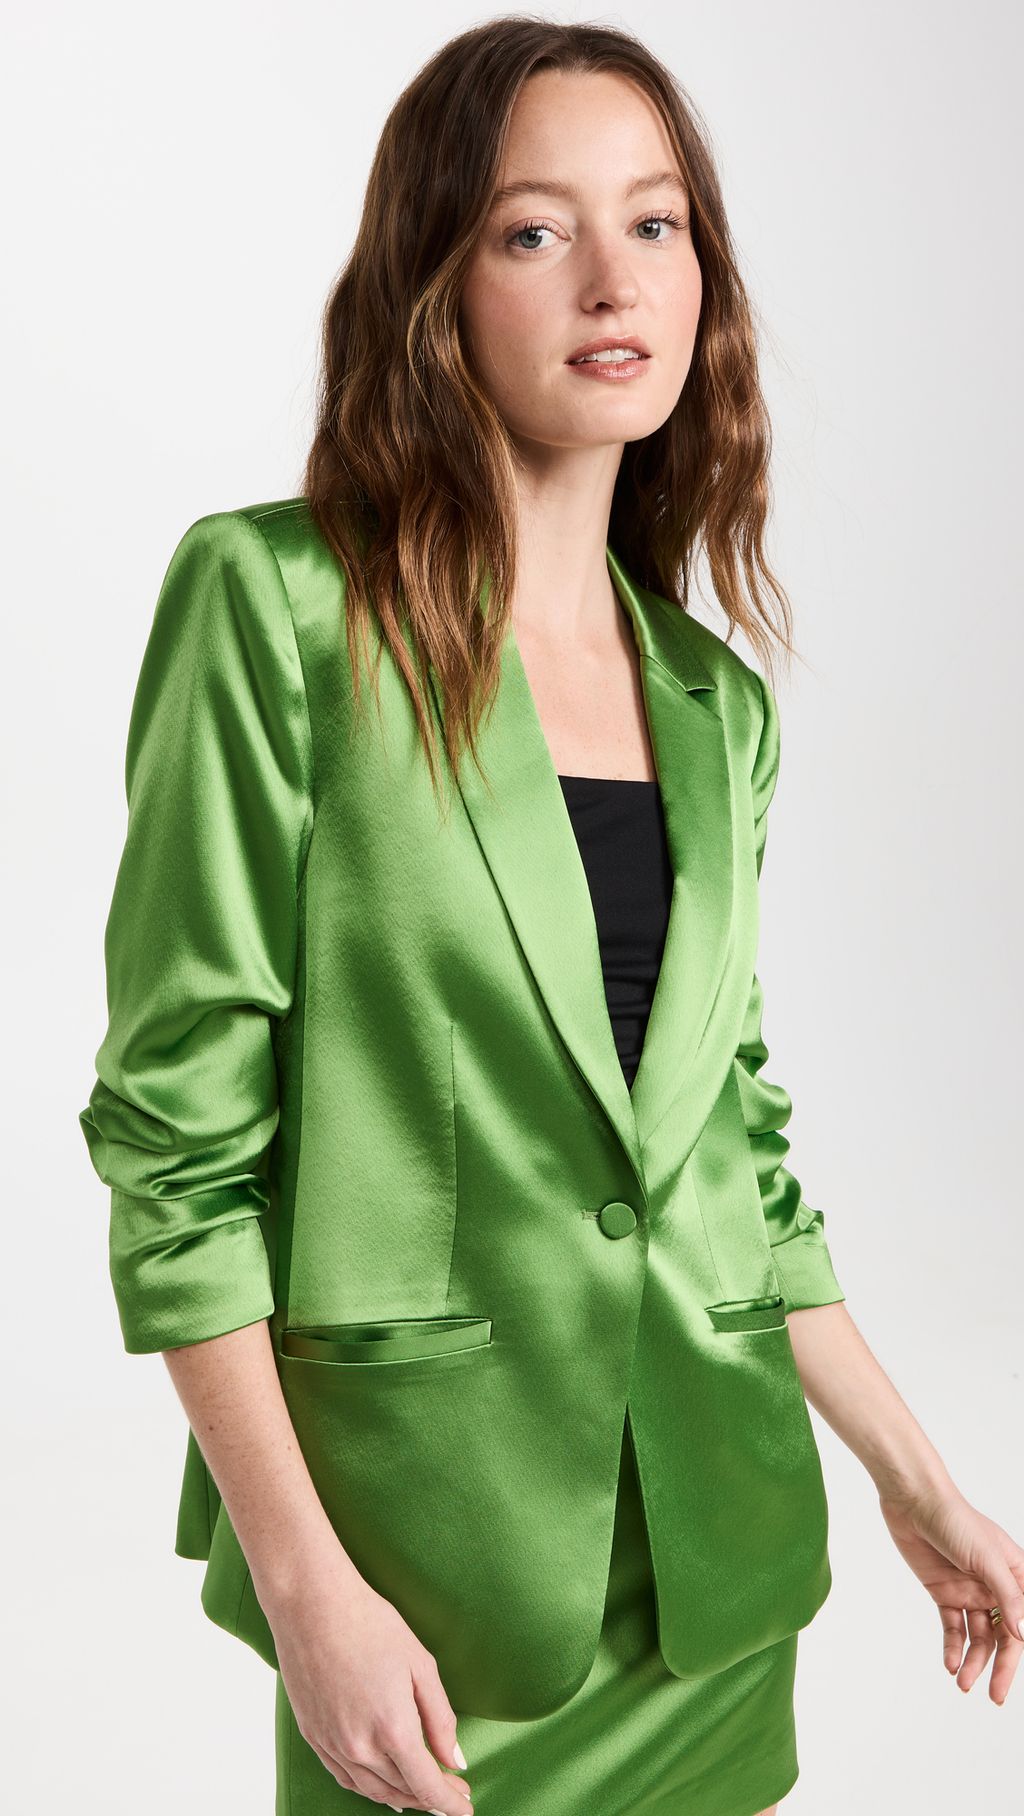 Let's Talk About the Satin-Clothing Trend: 29 Key Pieces | Who What Wear